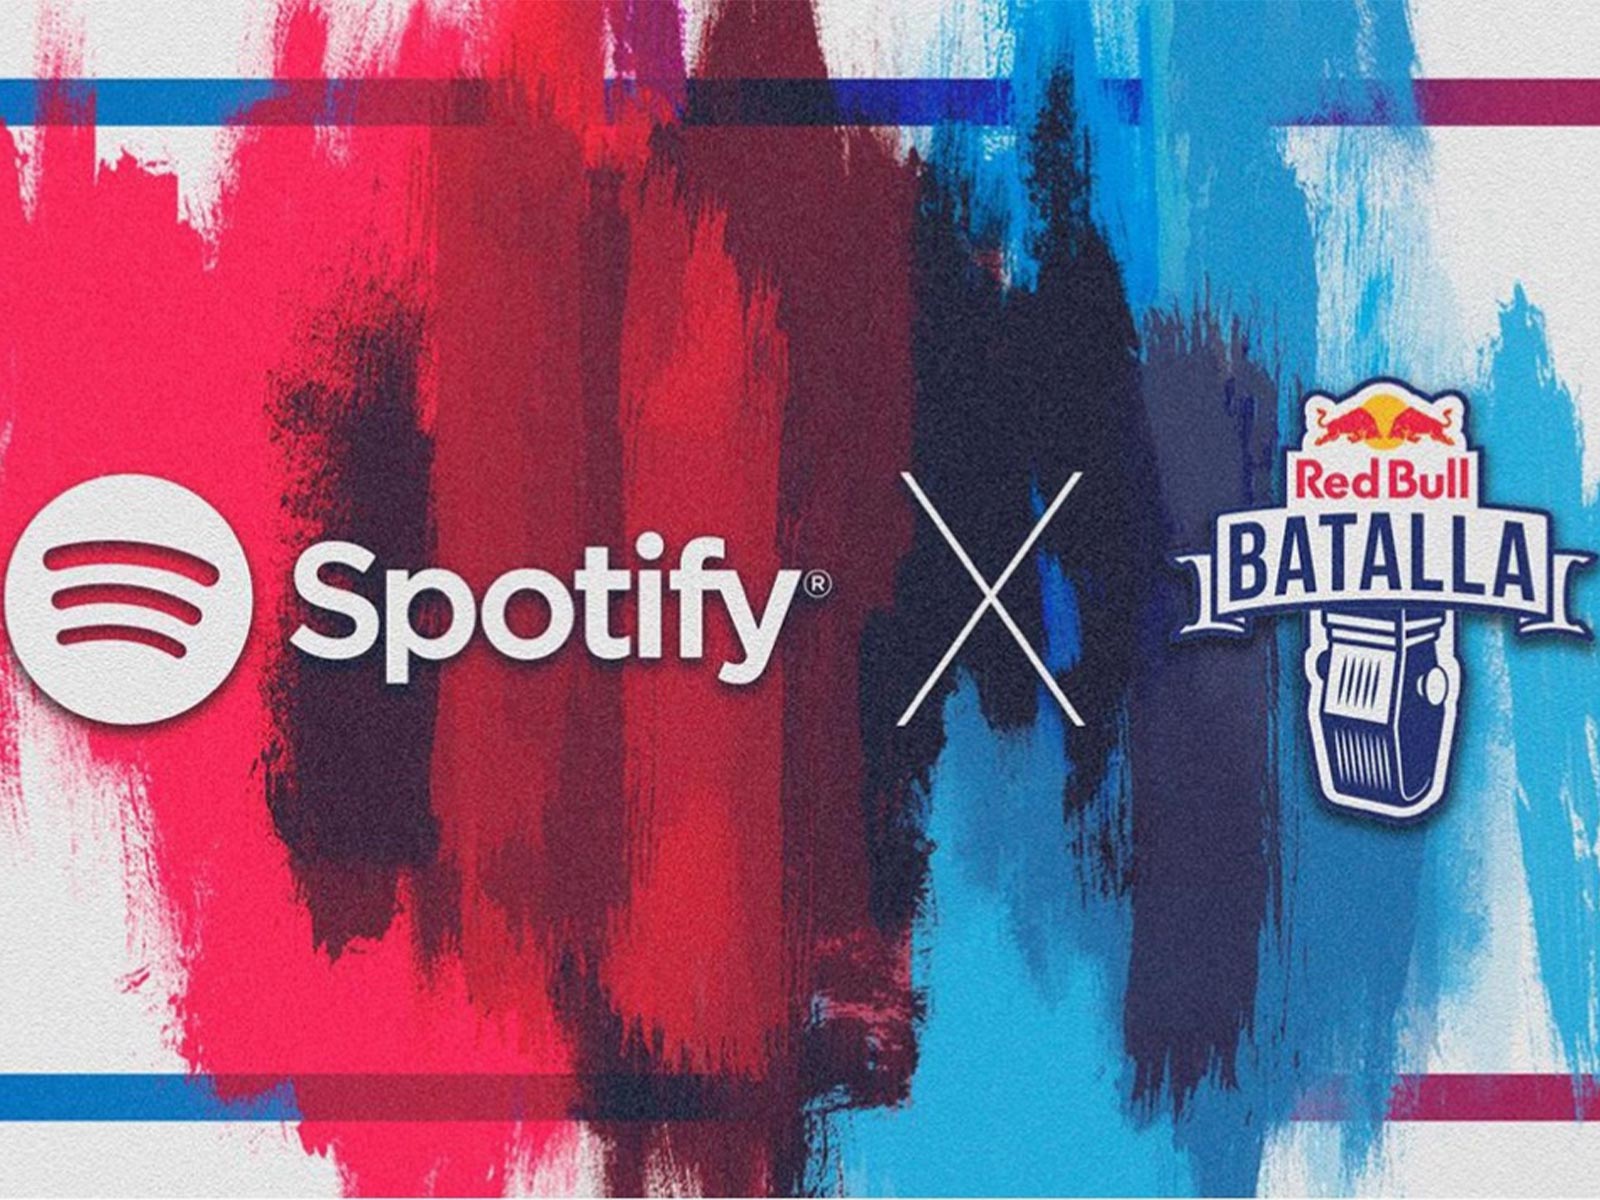 Red Bull Batalla makes the leap to Spotify with podcasts, playlists, audio battles and more